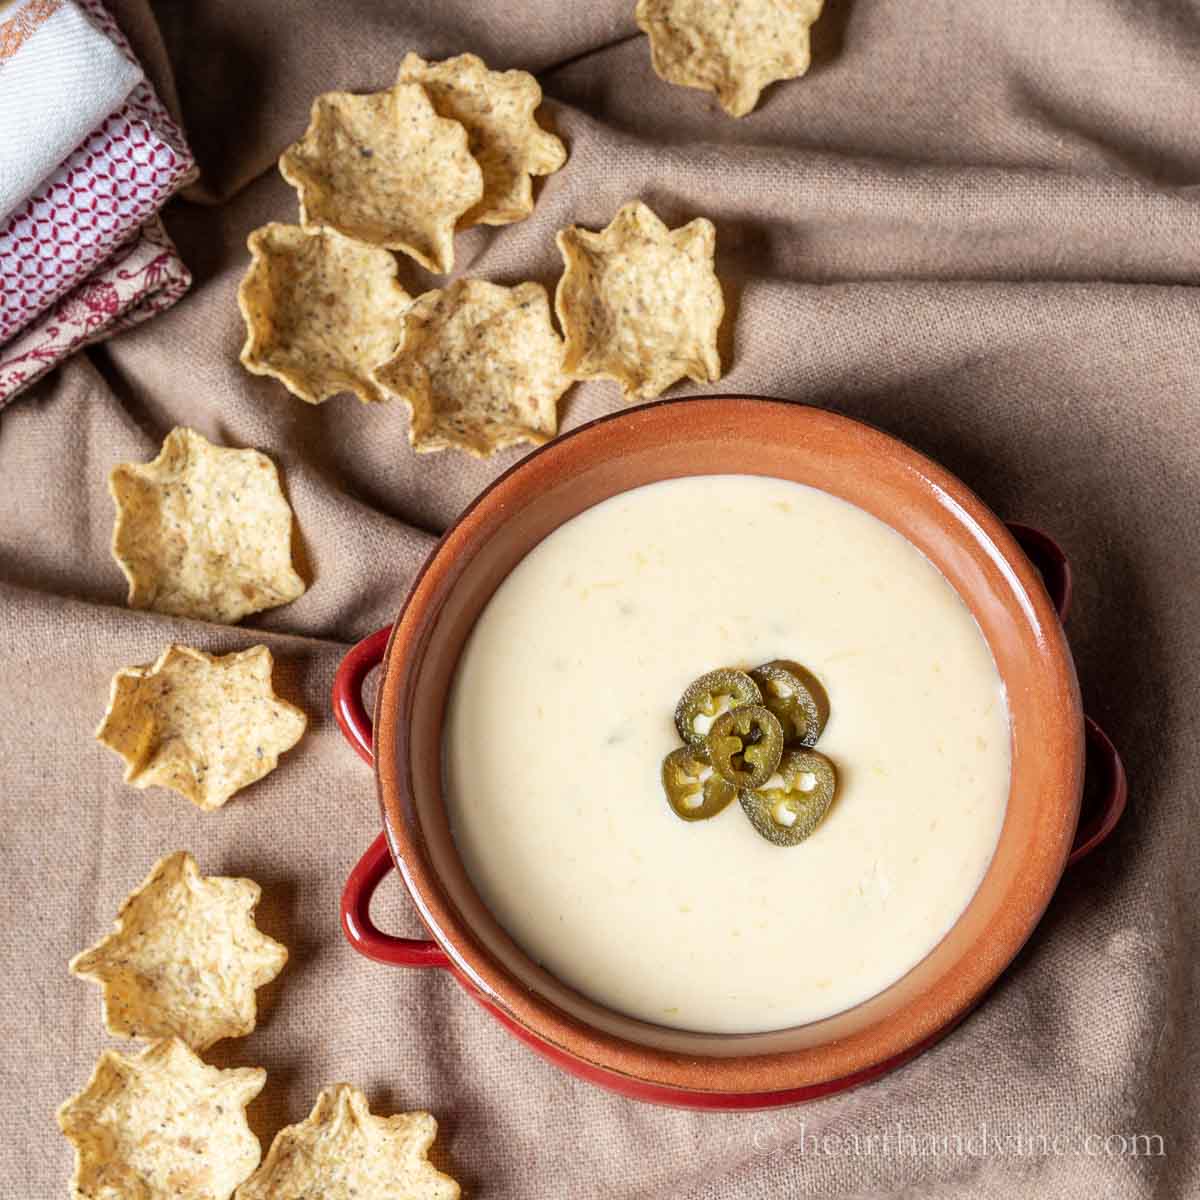 Bowl of queso dip with jalapeno slices in the middle and tortilla chips around the left side.